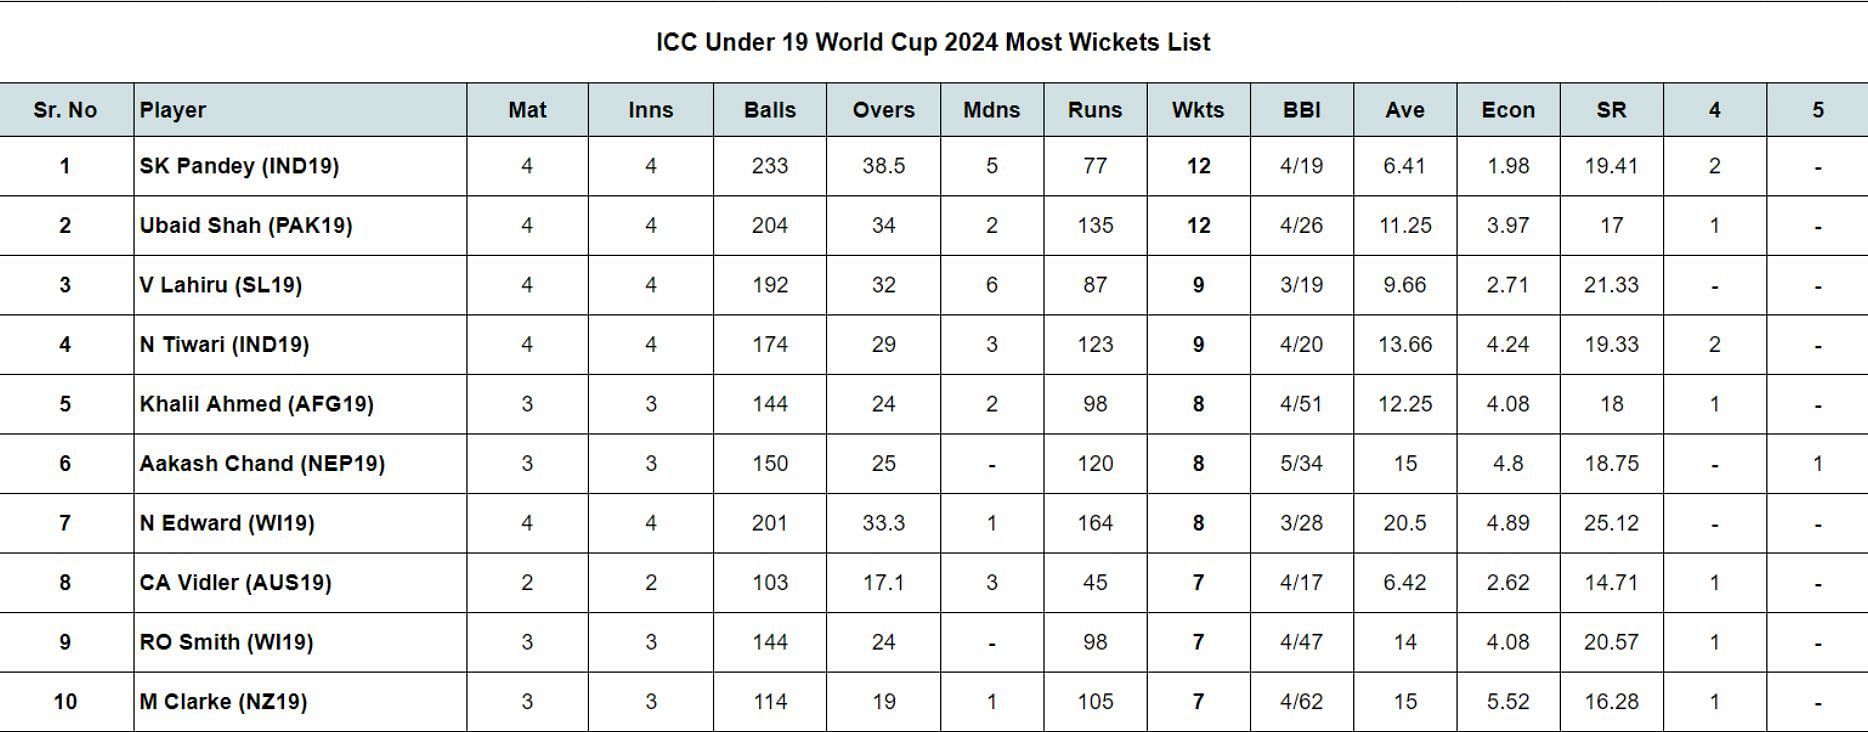 ICC Under 19 World Cup 2024 Most Wickets List updated after Match 27